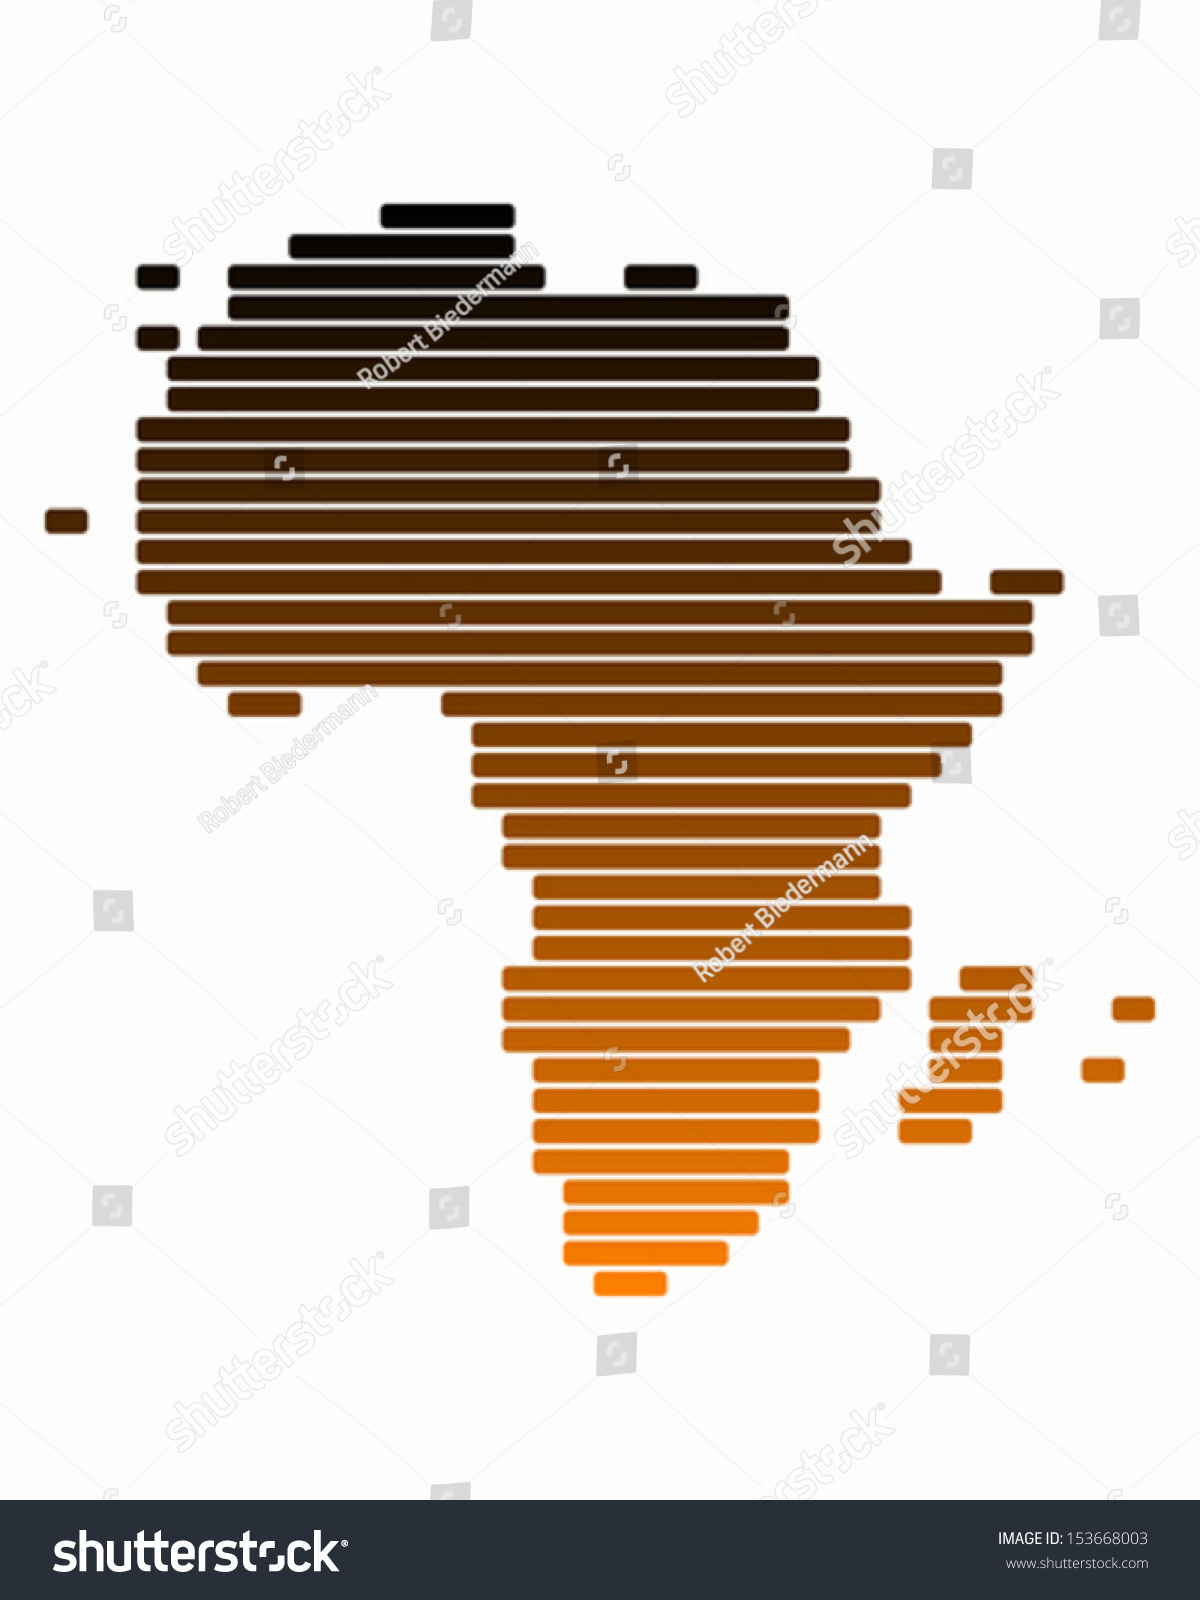 Map Of Africa Royalty Free Stock Vector 153668003 3956